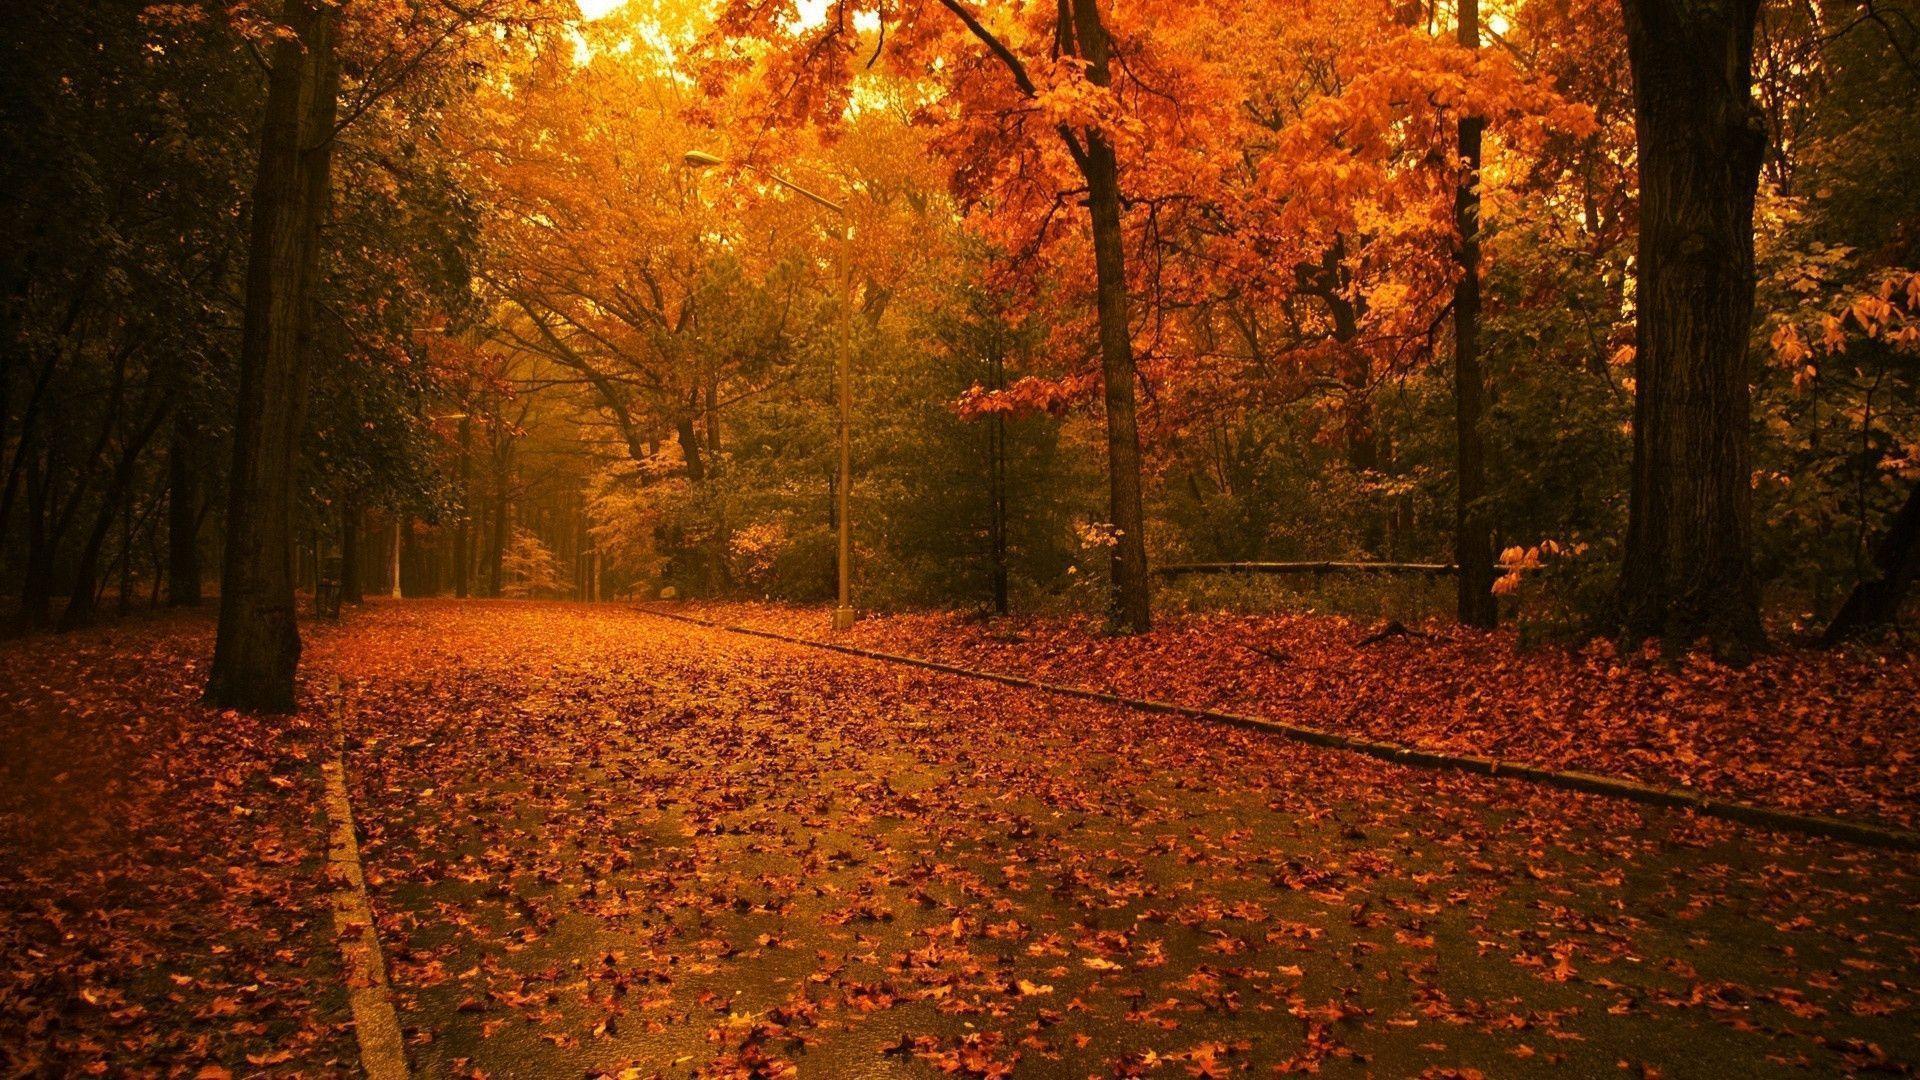 Autumn HD Wallpaper, Image And Picture 2017